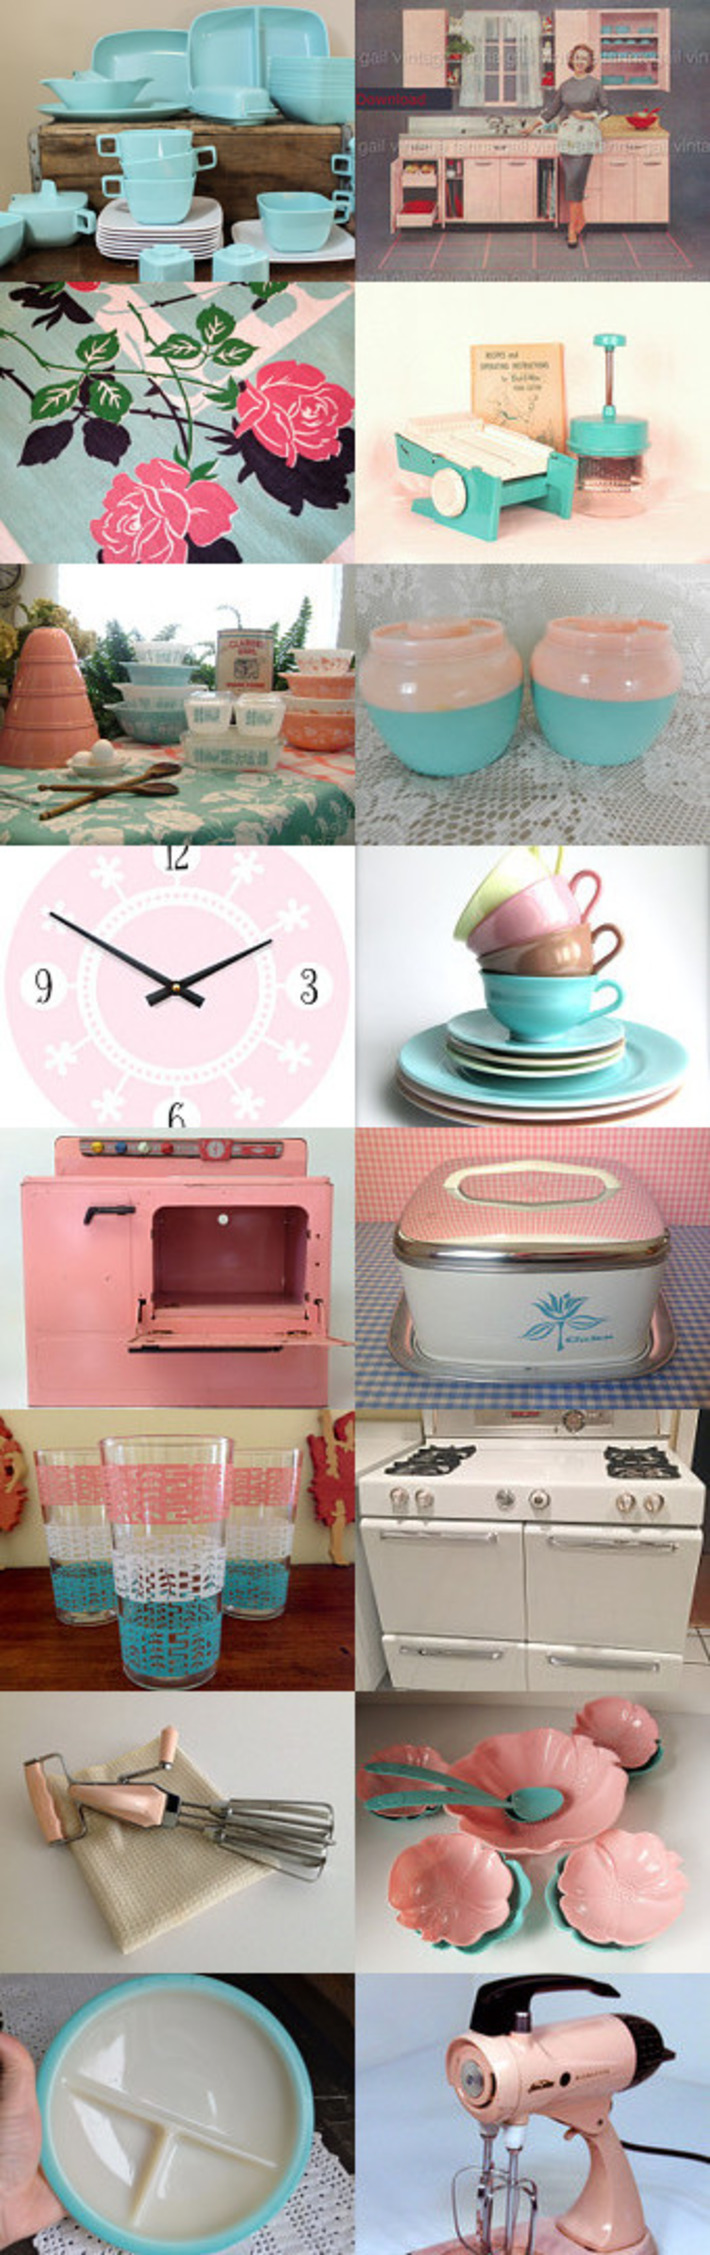 Spring Kitchen in Aquas & Pinks by Lonnie on Etsy | Antiques & Vintage Collectibles | Scoop.it